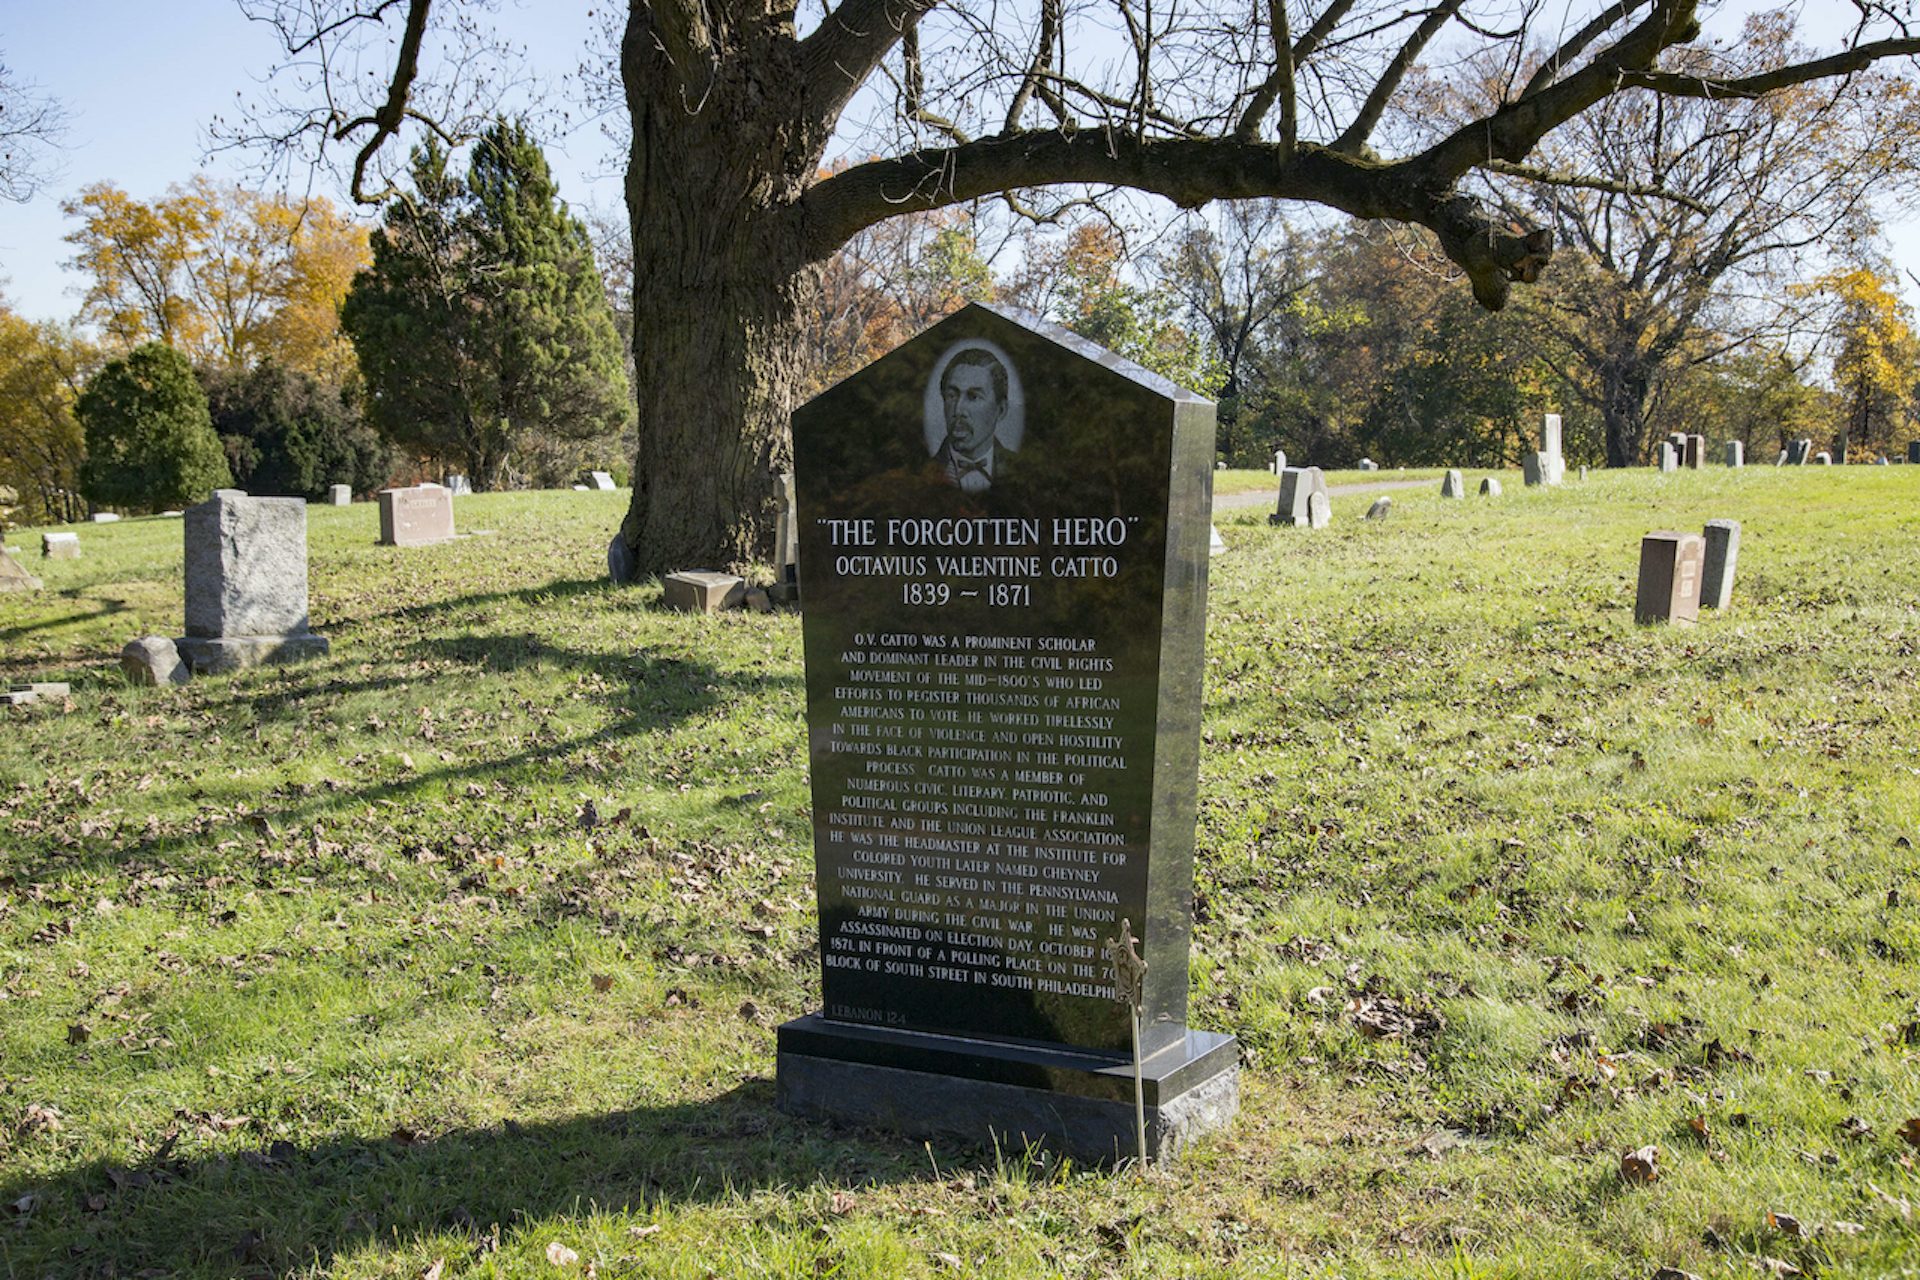 A new headstone for Octavius Catto was installed in 2007 by the Octavius V. Catto Memorial Fund.